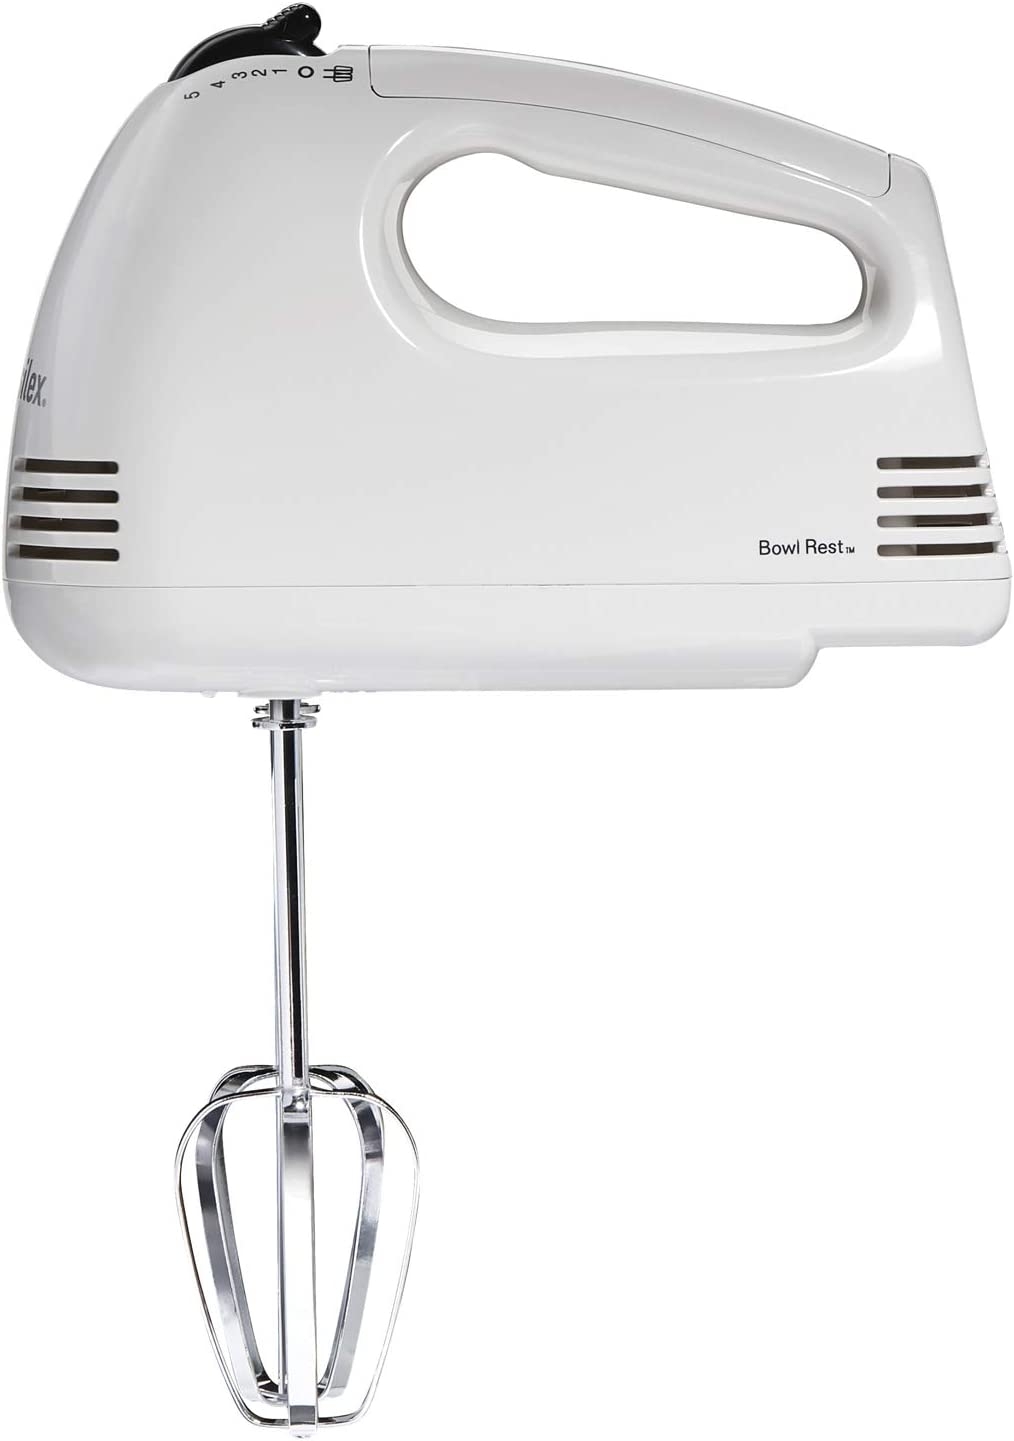 Proctor Silex Easy Mix 5-Speed Electric Hand Mixer with Bowl Rest, Compact and Lightweight, Black Import To Shop ×Product